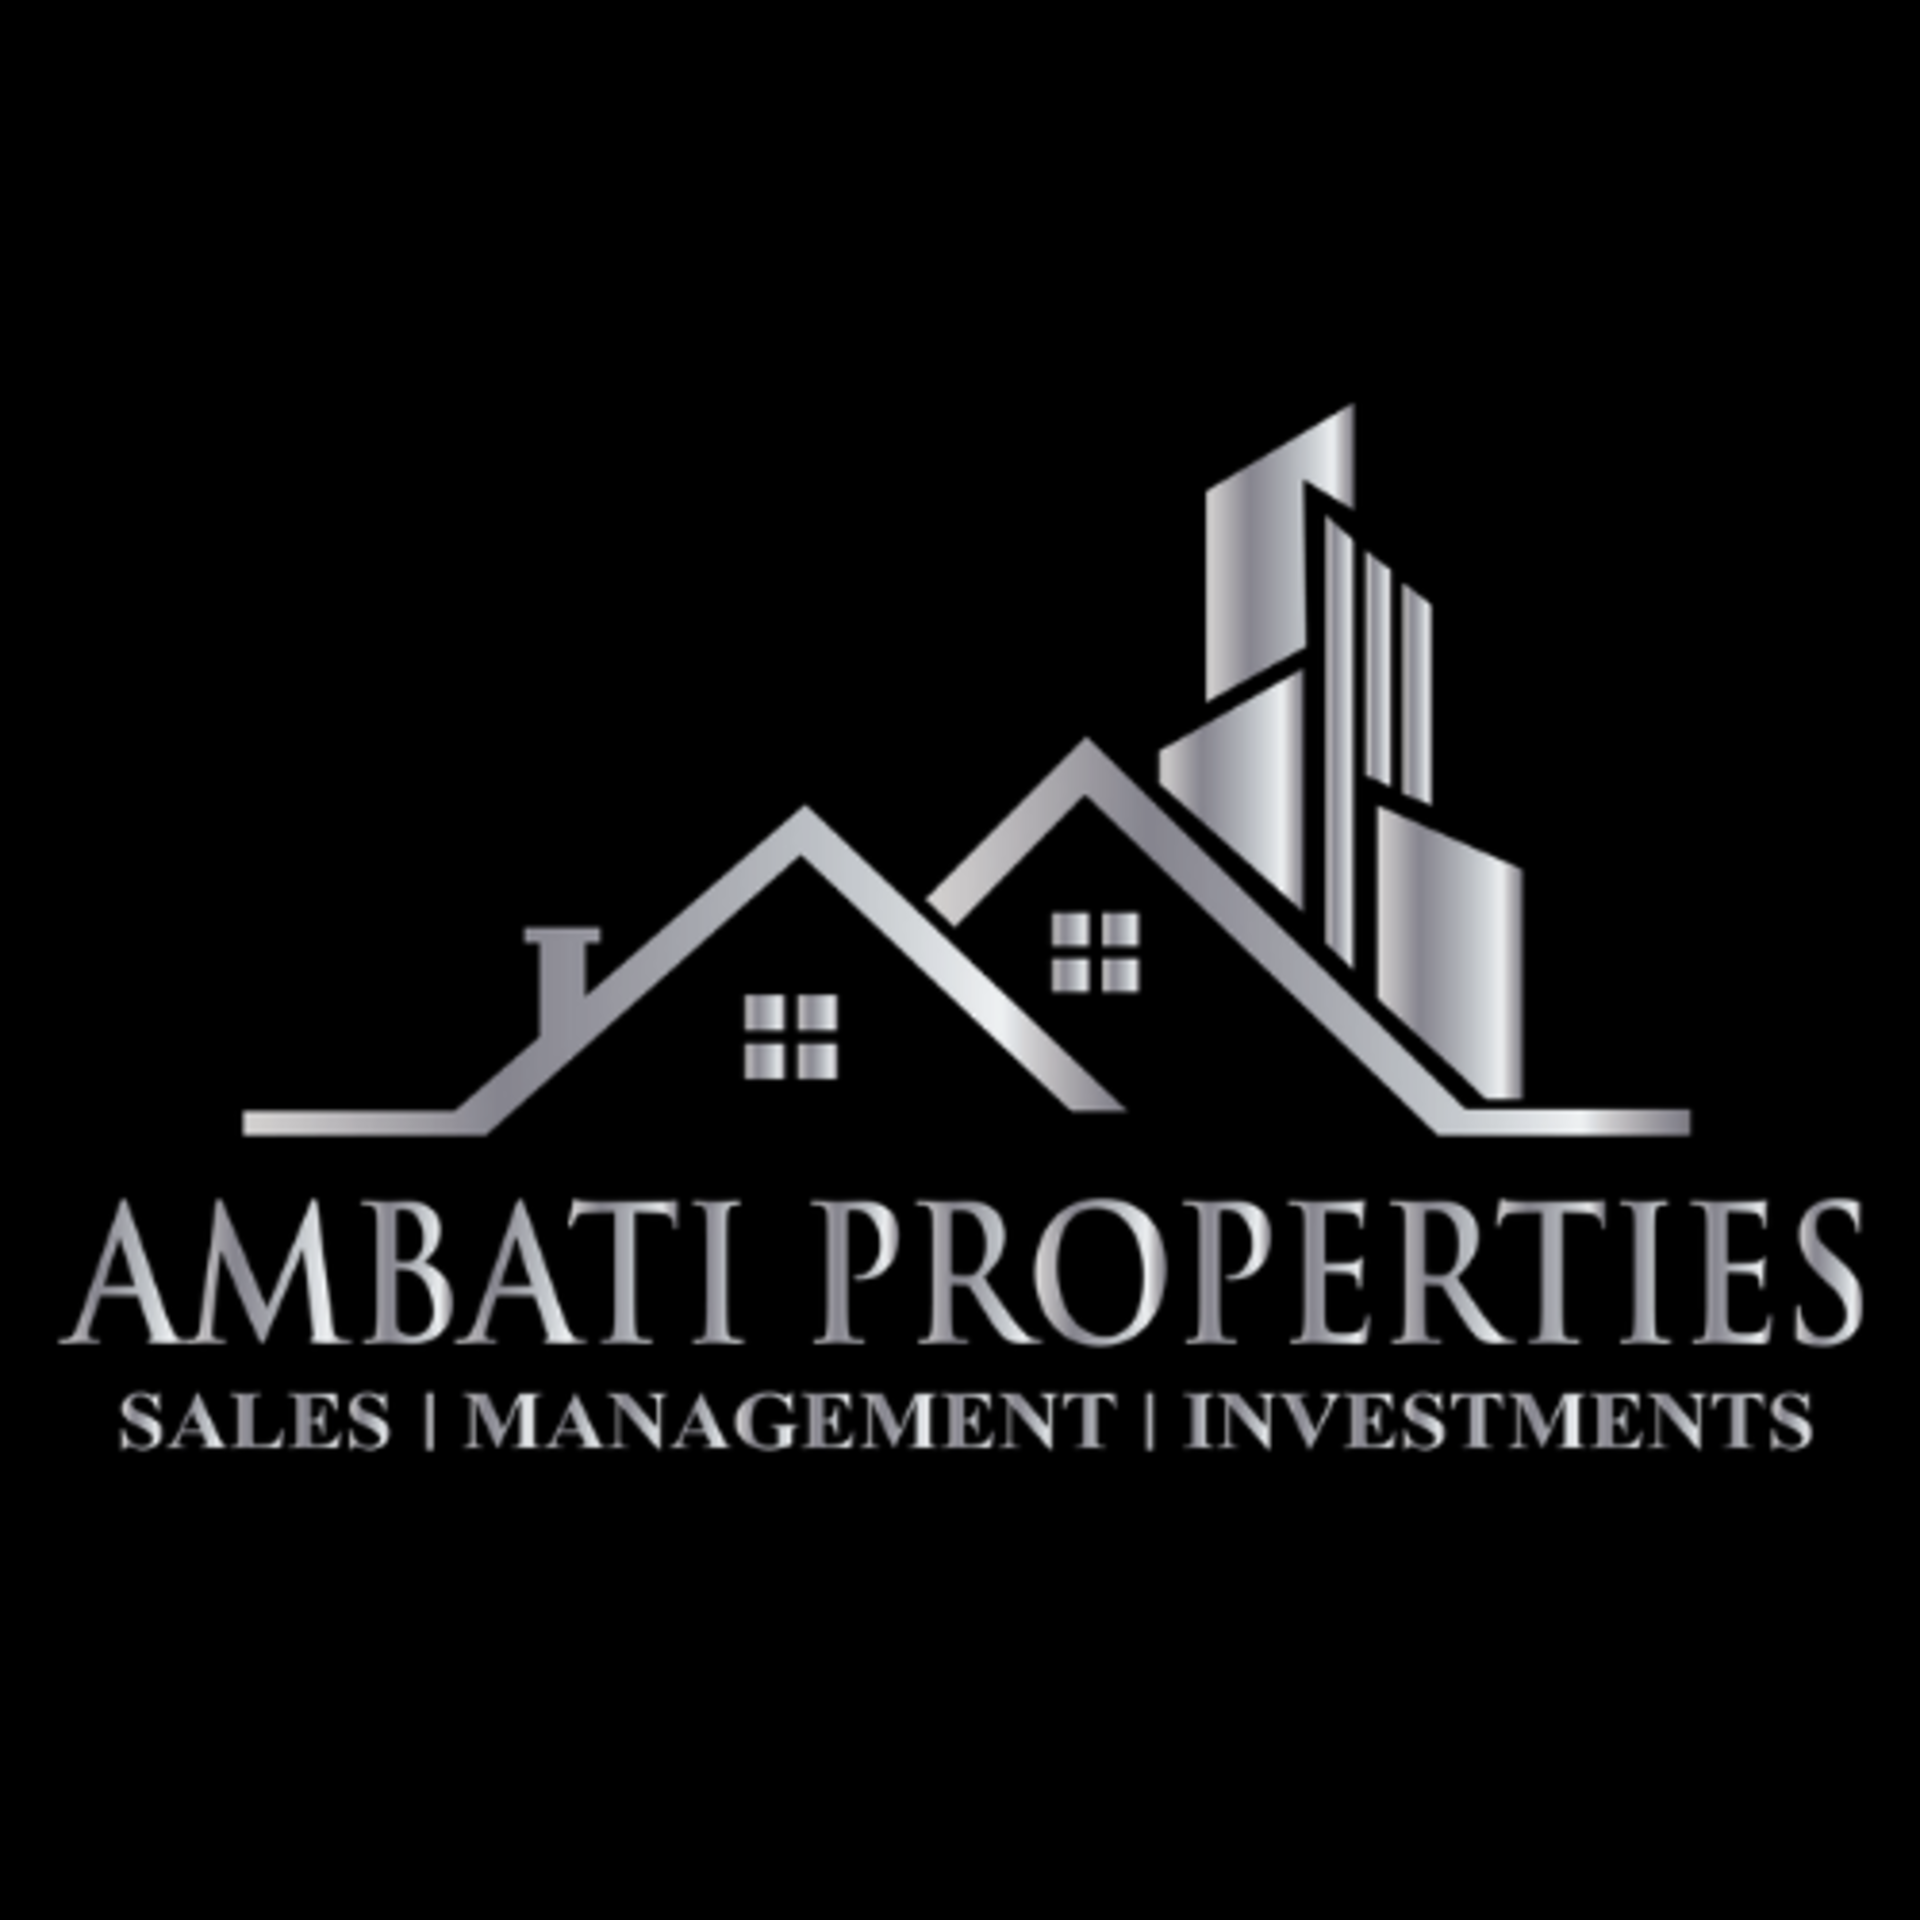 Sales - Ambati Properties is here to assist you.